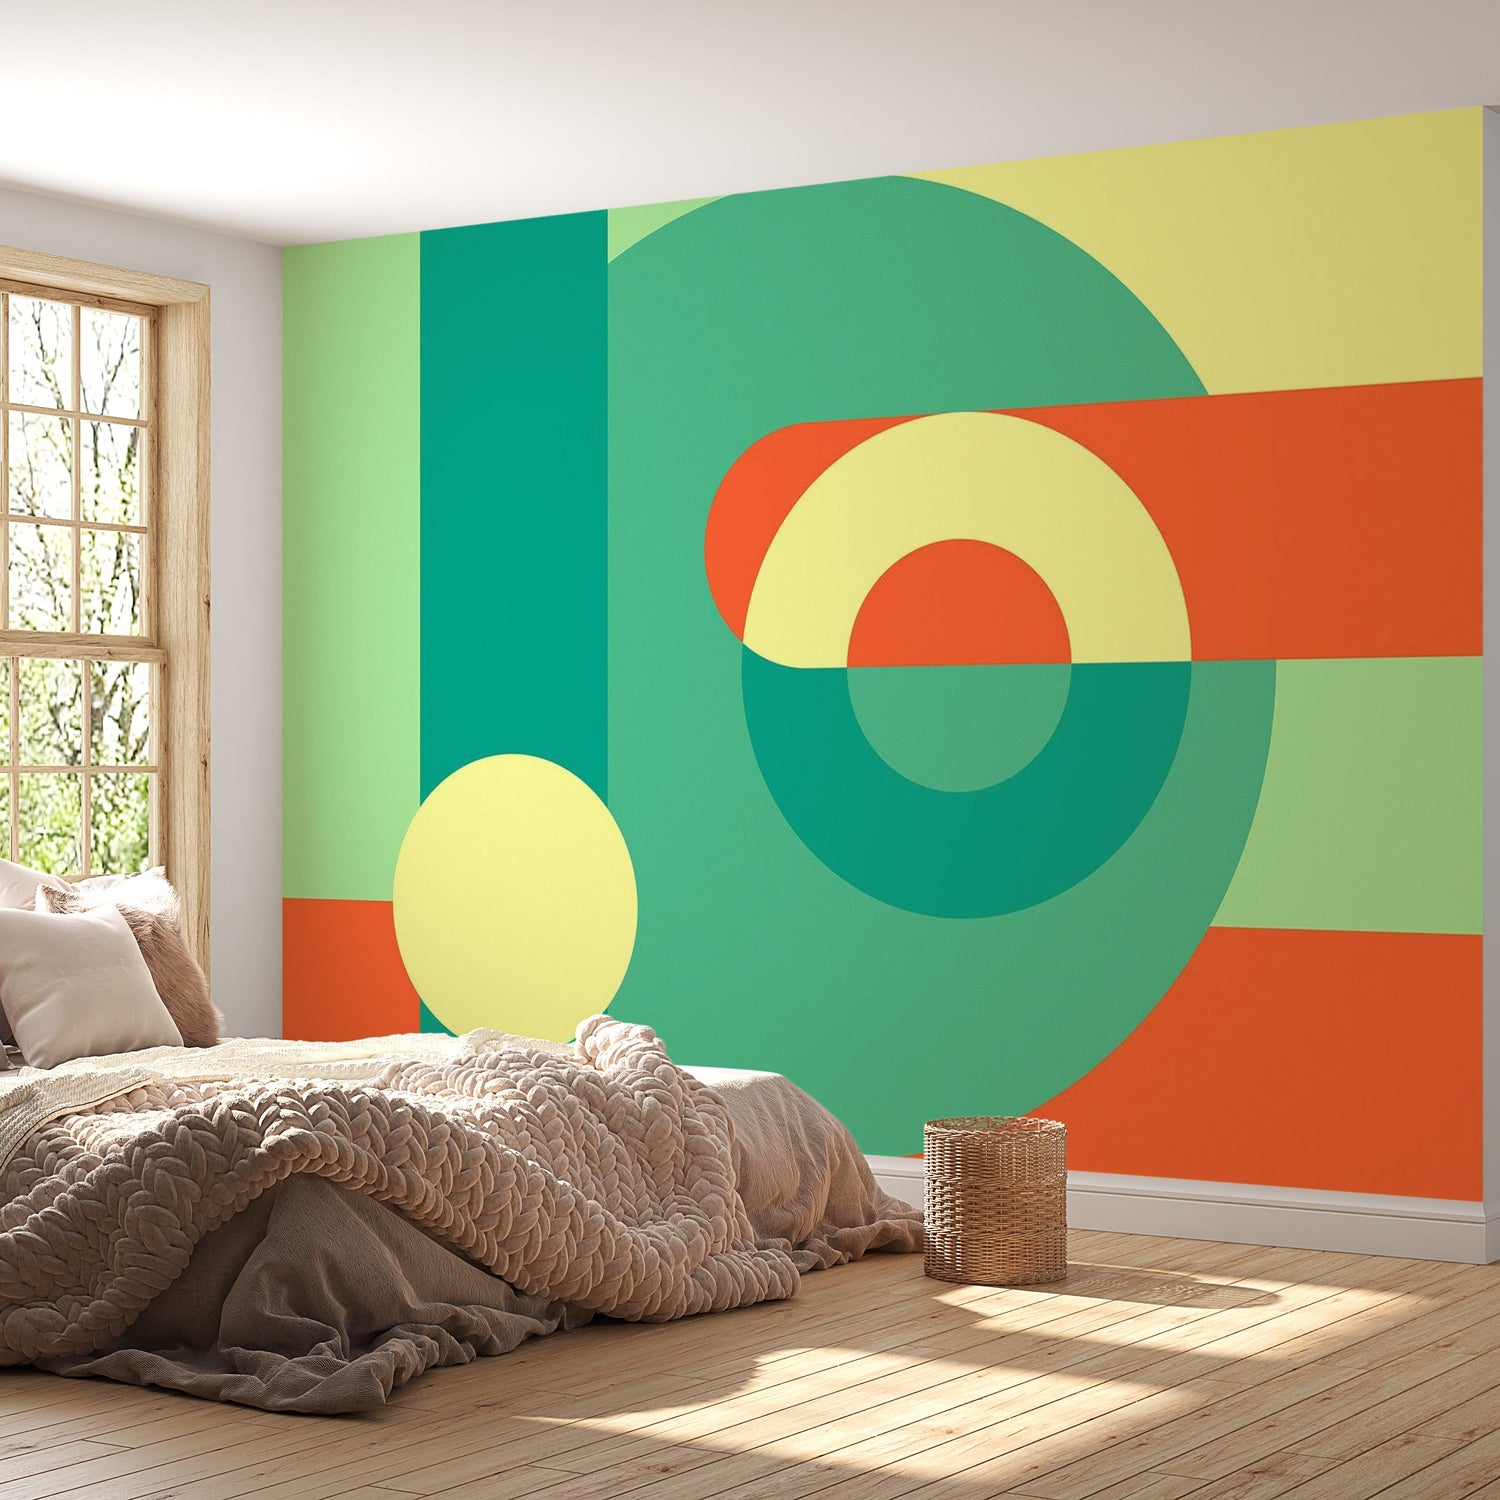 Peel & Stick Wall Mural - Geometric Abstract Design Green - Removable Wall Decals